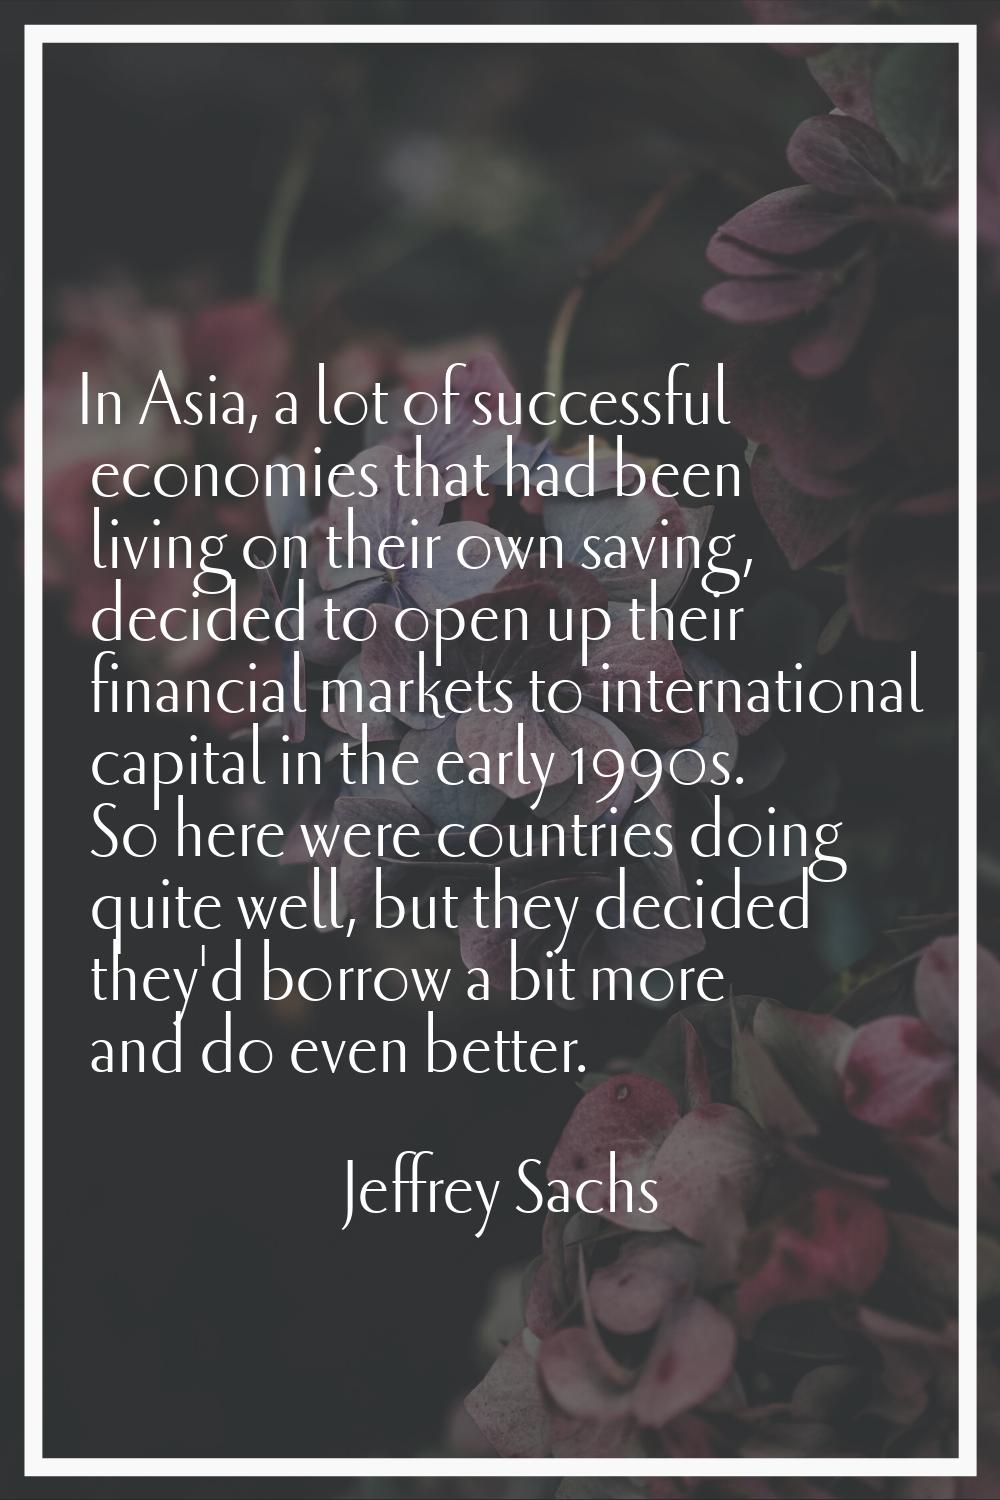 In Asia, a lot of successful economies that had been living on their own saving, decided to open up